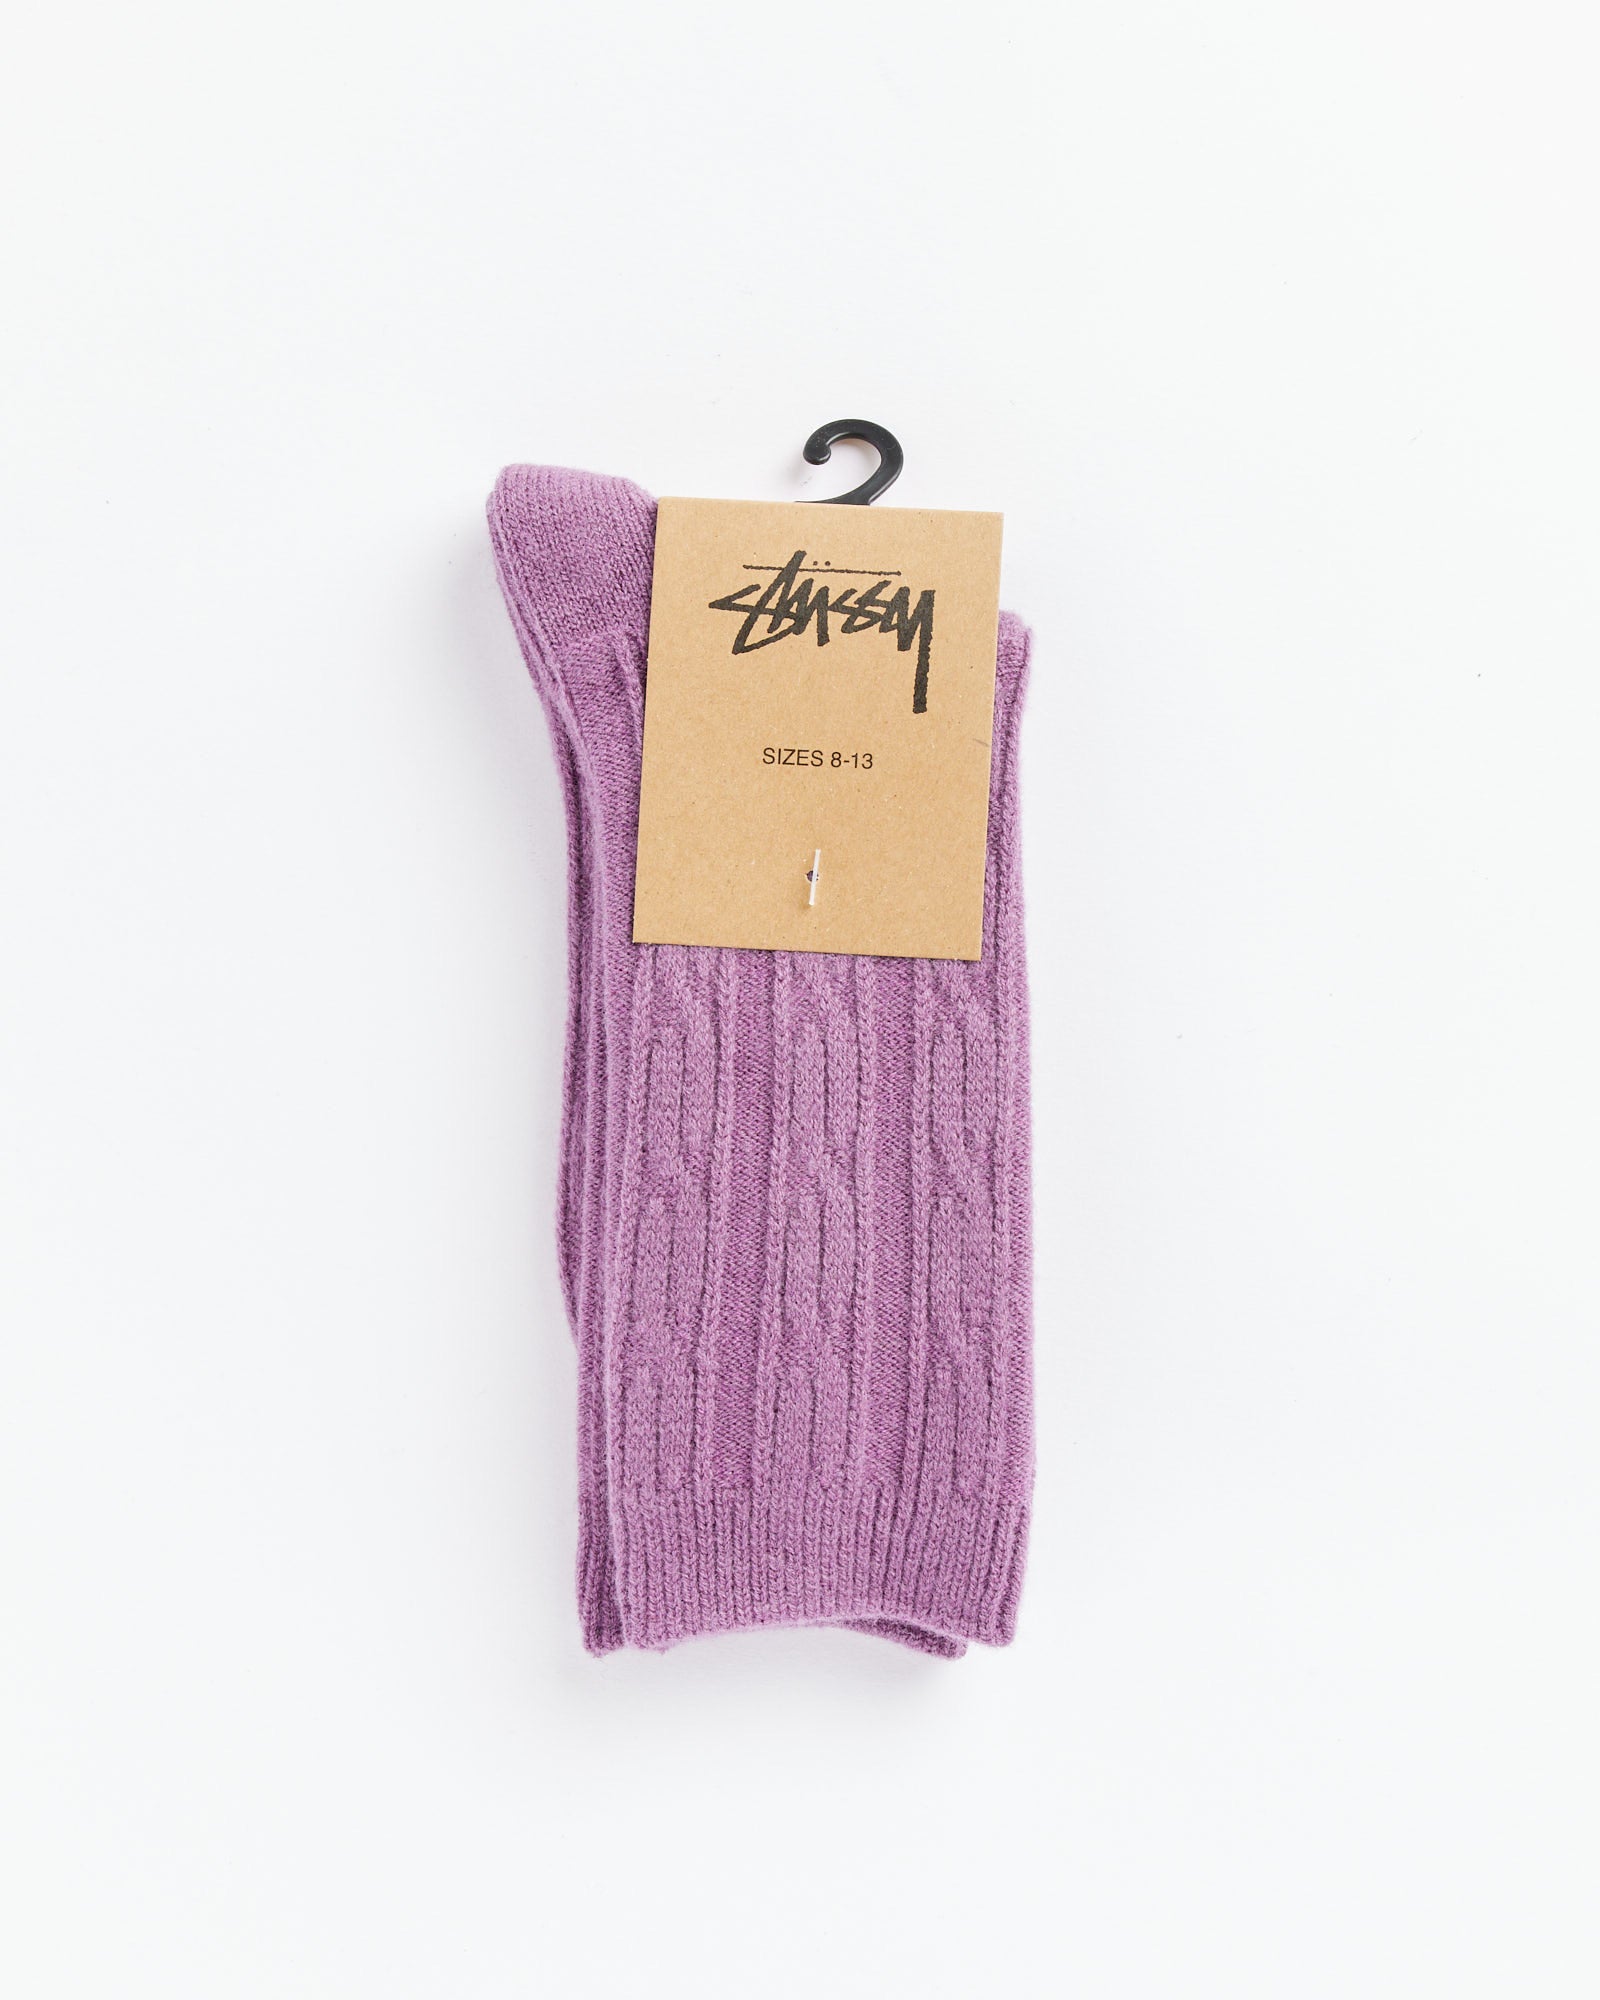 Cable Knit Dress Socks in Plum